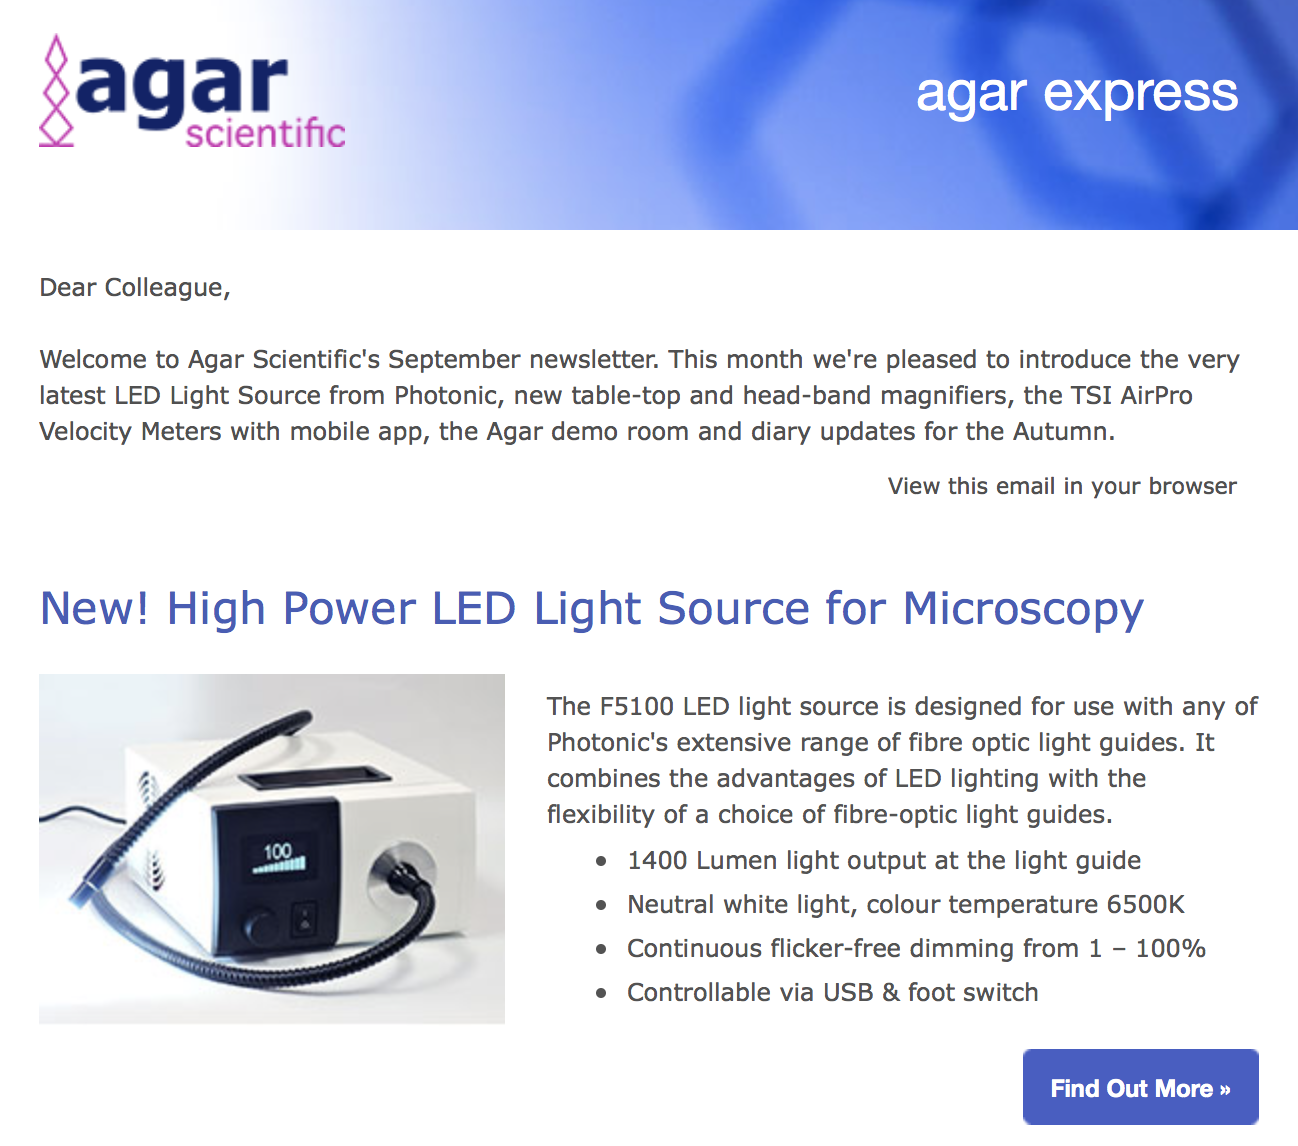 Agar Express September 2017 - new LED Light Source, magnifiers, TSI AirPro Velocity Meters with mobile app, the Agar demo room & more